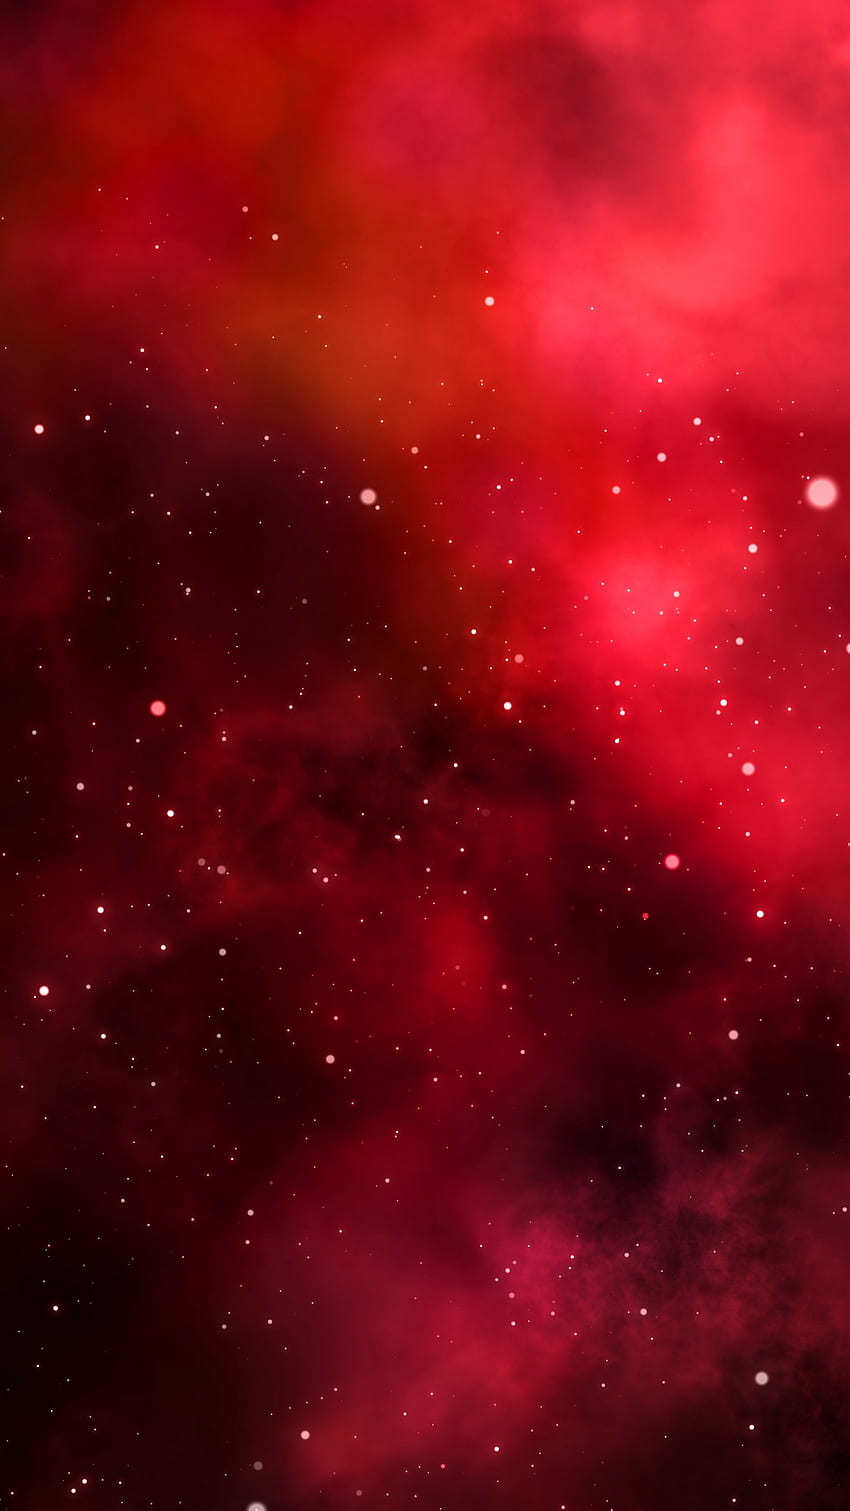 100+] Outer Space Red 4k Wallpapers | Wallpapers.com